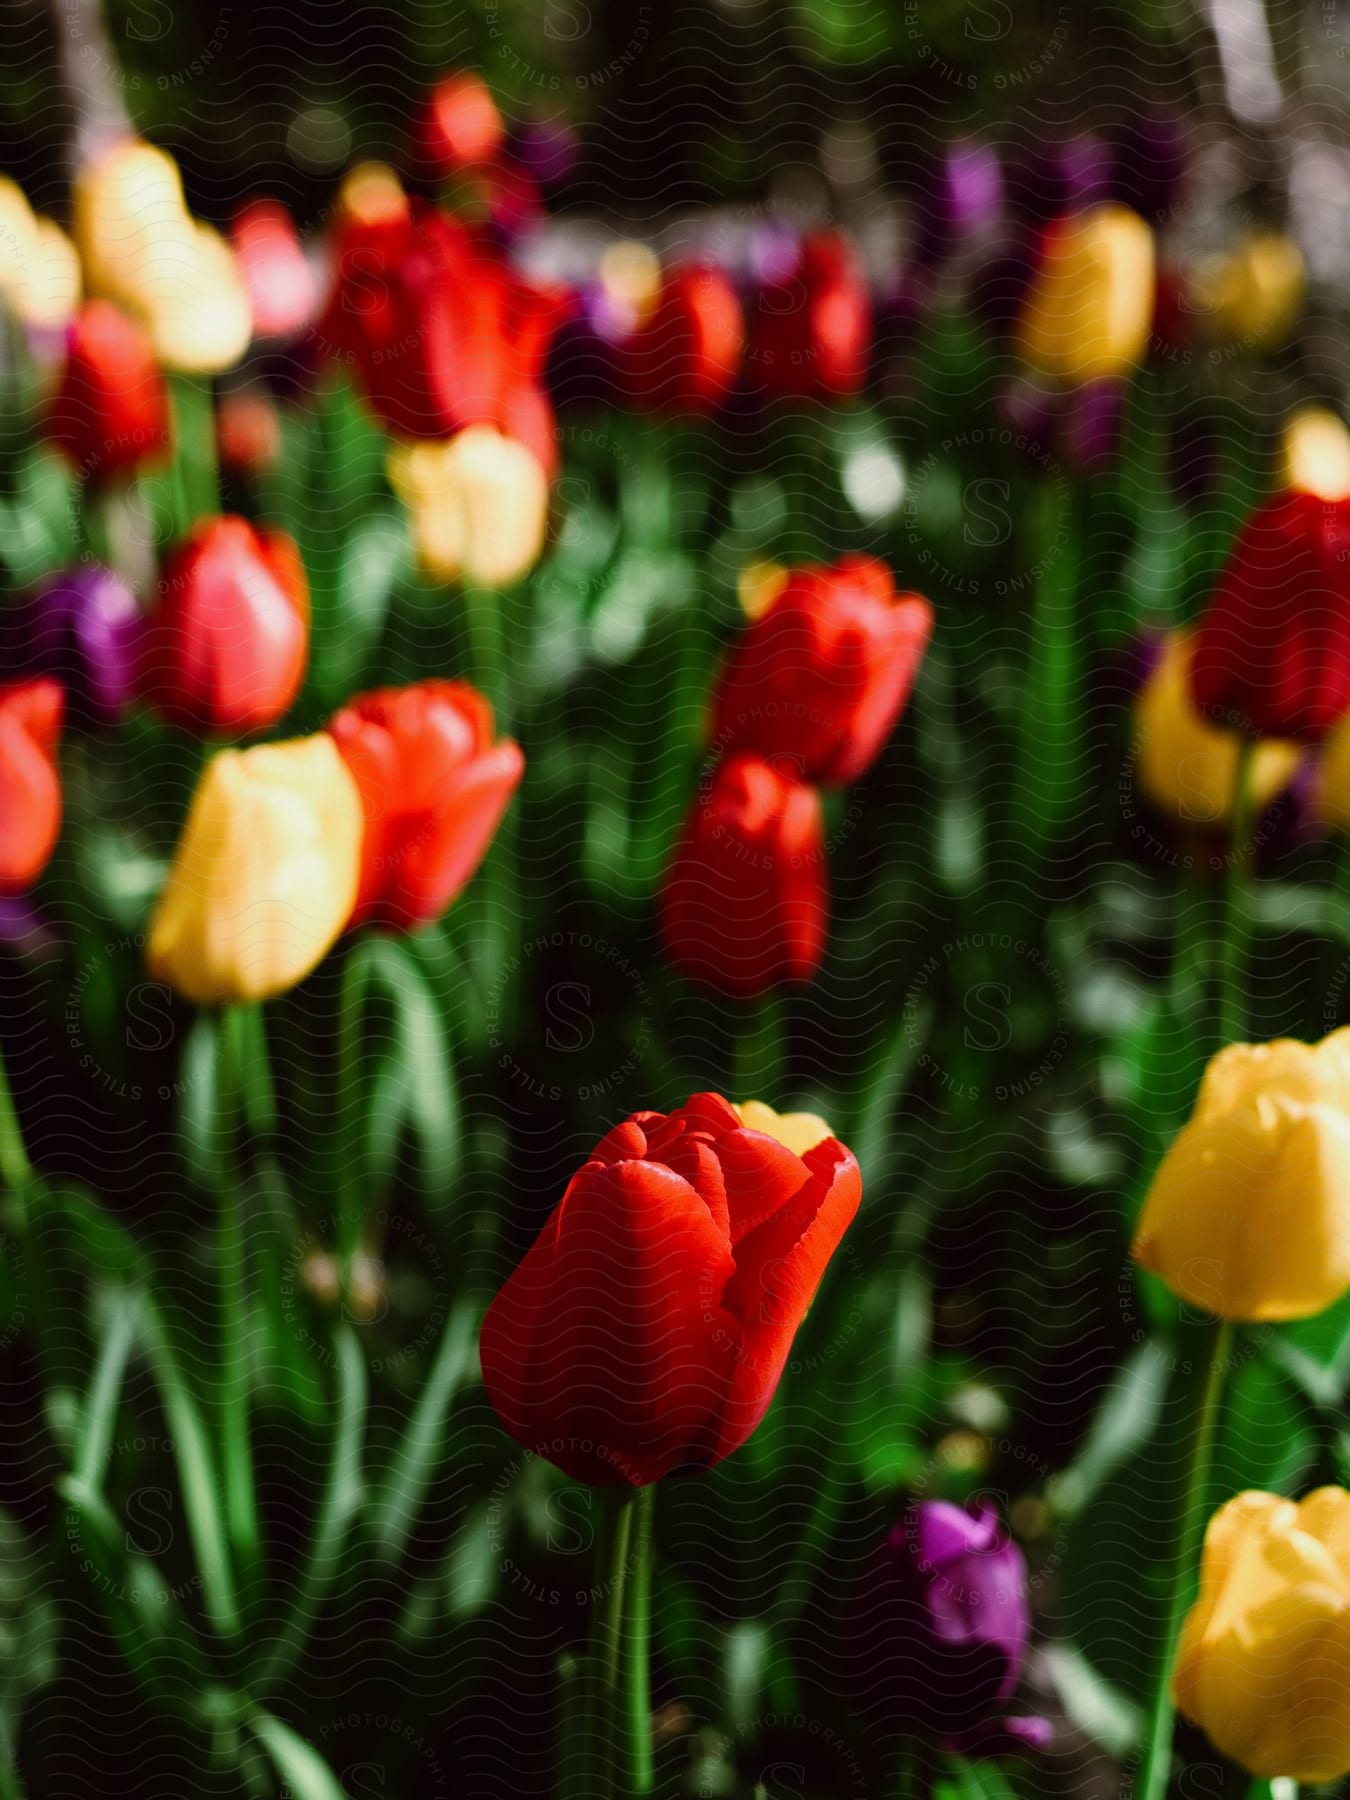 Garden with colorful tulips